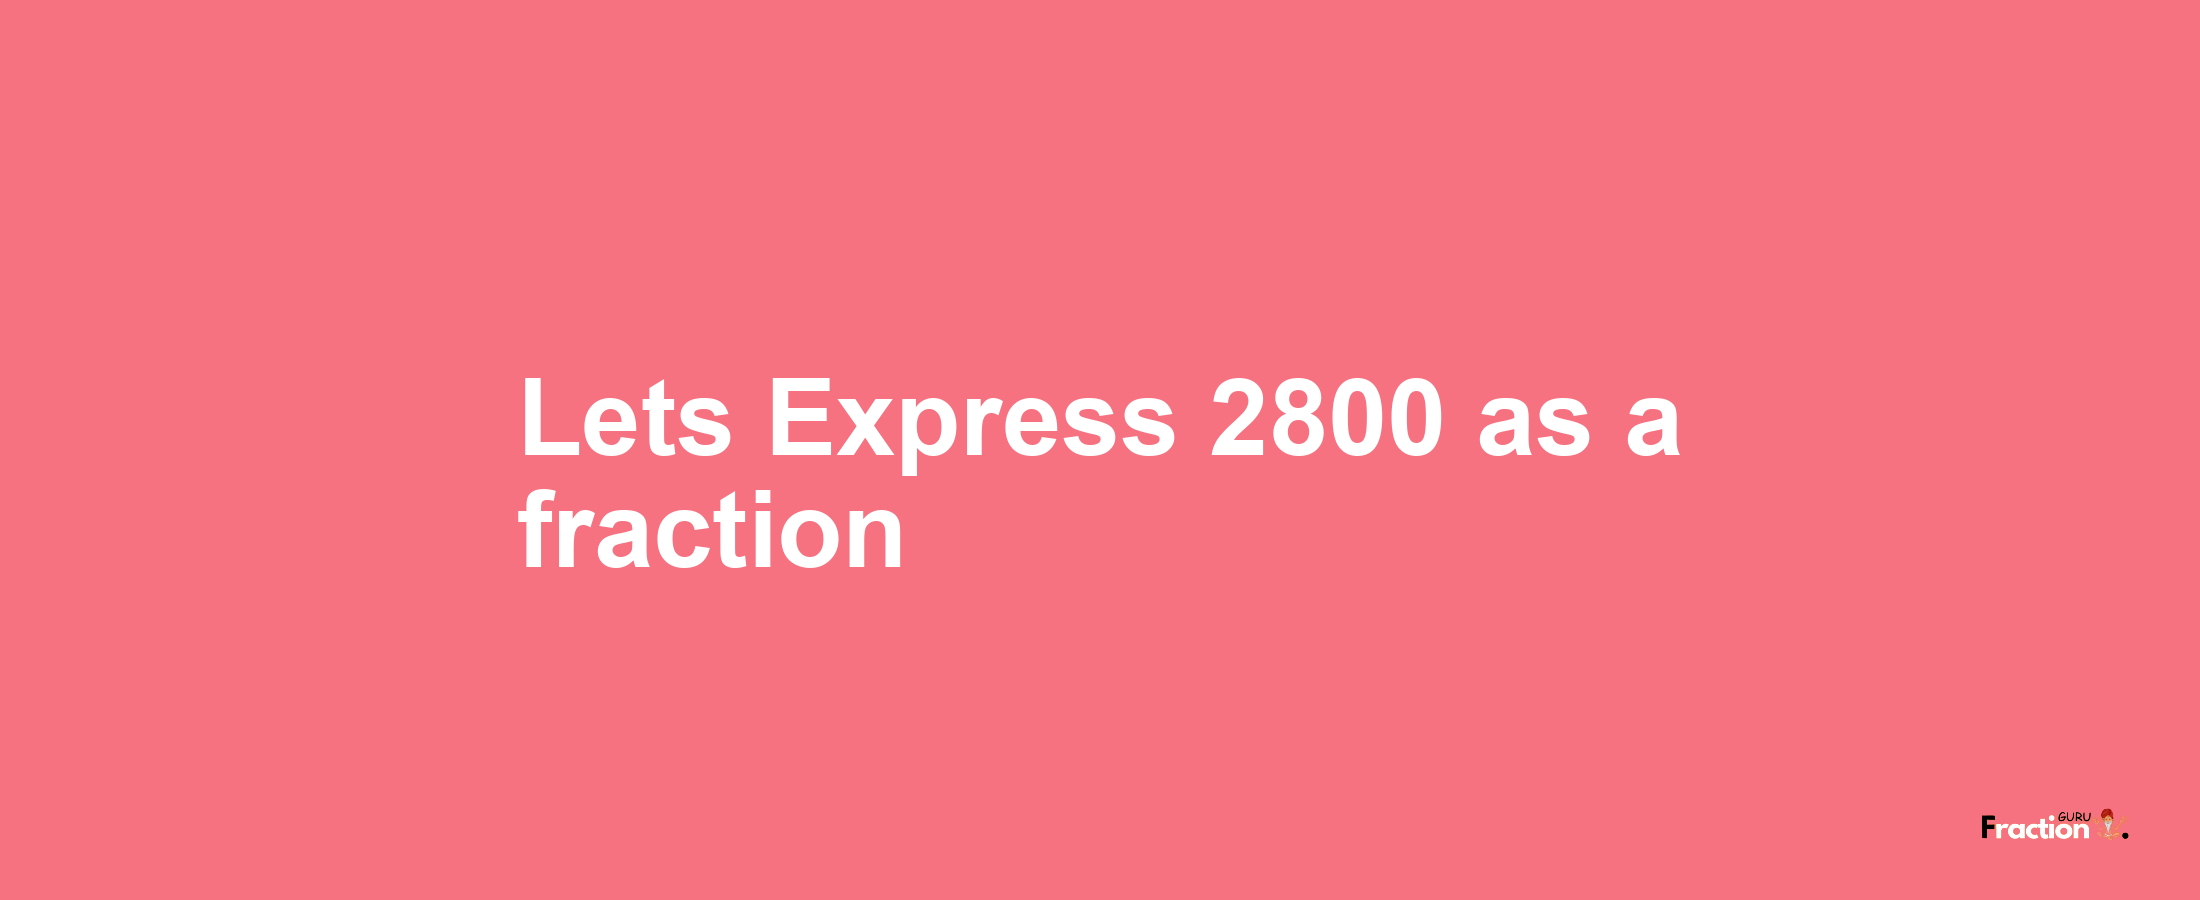 Lets Express 2800 as afraction